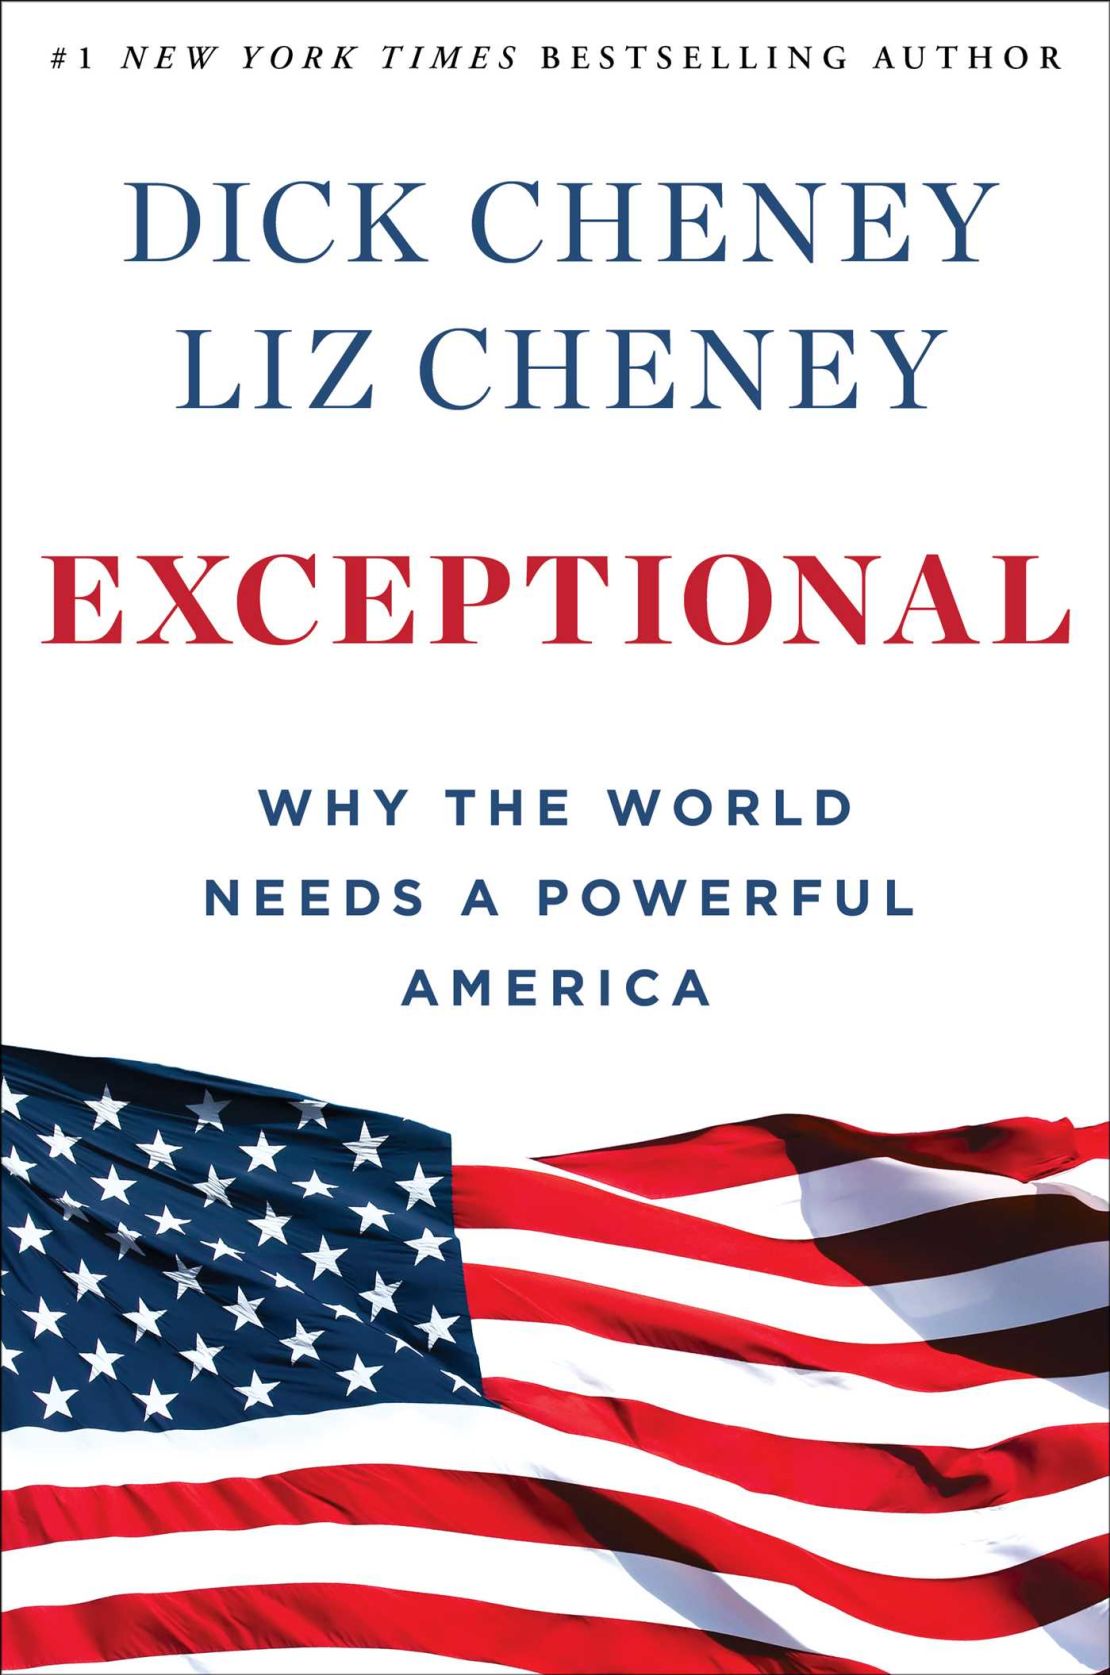 Dick Cheney Exceptional Book Cover